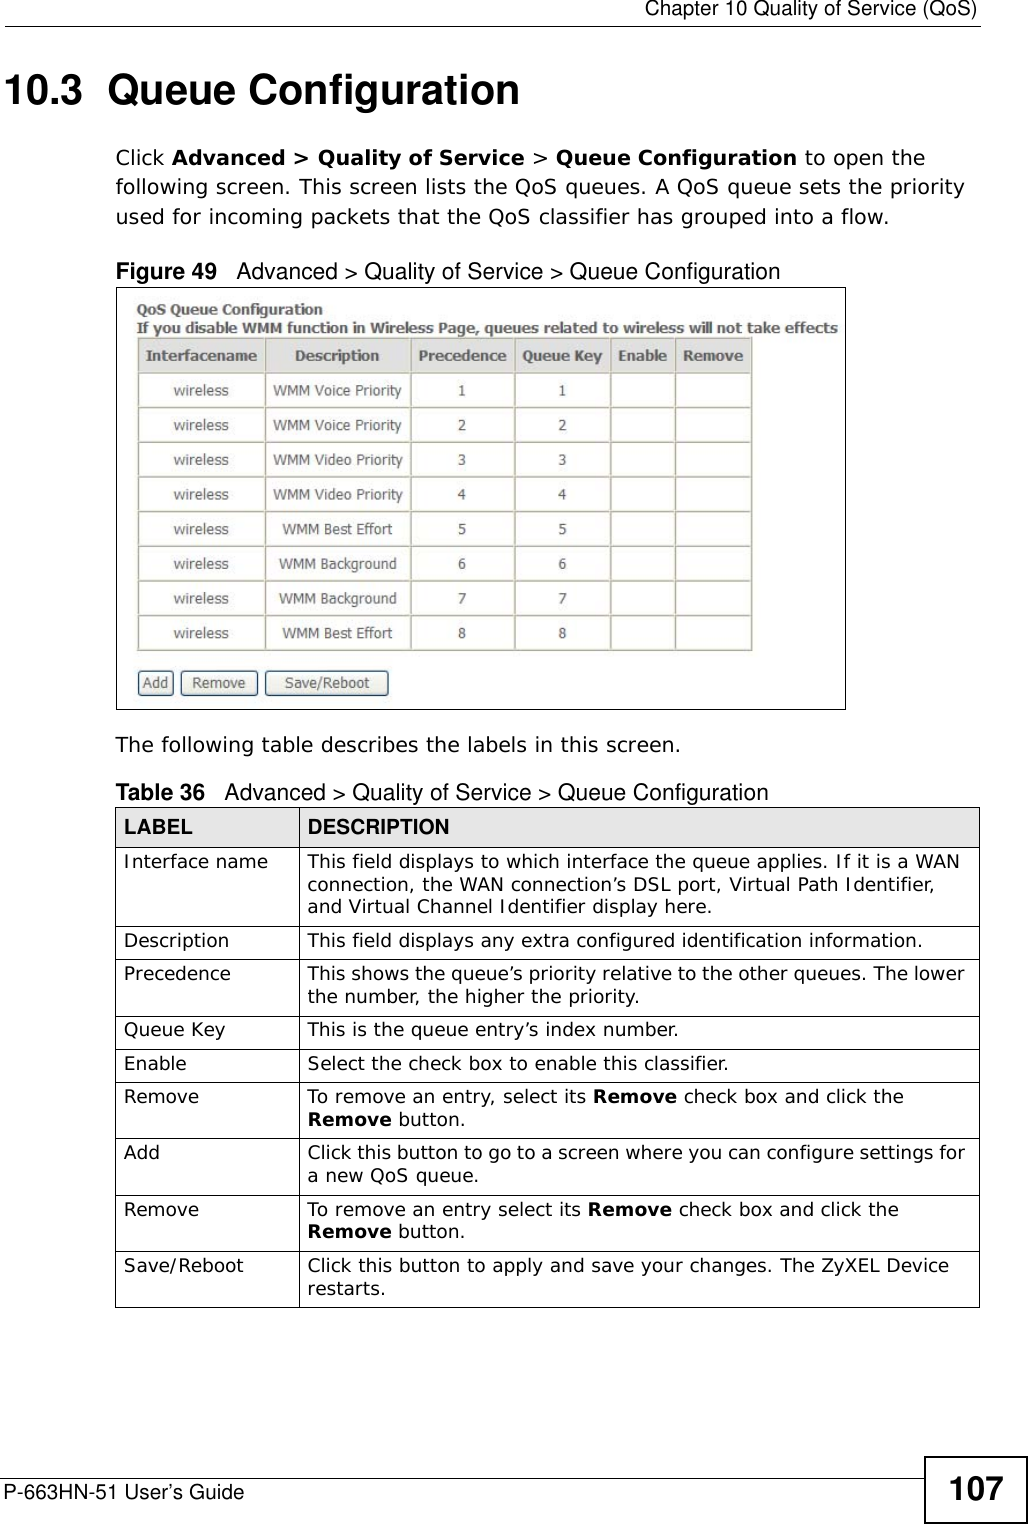  Chapter 10 Quality of Service (QoS)P-663HN-51 User’s Guide 10710.3  Queue ConfigurationClick Advanced &gt; Quality of Service &gt; Queue Configuration to open the following screen. This screen lists the QoS queues. A QoS queue sets the priority used for incoming packets that the QoS classifier has grouped into a flow. Figure 49   Advanced &gt; Quality of Service &gt; Queue ConfigurationThe following table describes the labels in this screen.  Table 36   Advanced &gt; Quality of Service &gt; Queue ConfigurationLABEL DESCRIPTIONInterface name This field displays to which interface the queue applies. If it is a WAN connection, the WAN connection’s DSL port, Virtual Path Identifier, and Virtual Channel Identifier display here.Description This field displays any extra configured identification information.Precedence This shows the queue’s priority relative to the other queues. The lower the number, the higher the priority. Queue Key This is the queue entry’s index number.Enable Select the check box to enable this classifier.Remove To remove an entry, select its Remove check box and click the Remove button. Add Click this button to go to a screen where you can configure settings for a new QoS queue.Remove To remove an entry select its Remove check box and click the Remove button. Save/Reboot Click this button to apply and save your changes. The ZyXEL Device restarts. 